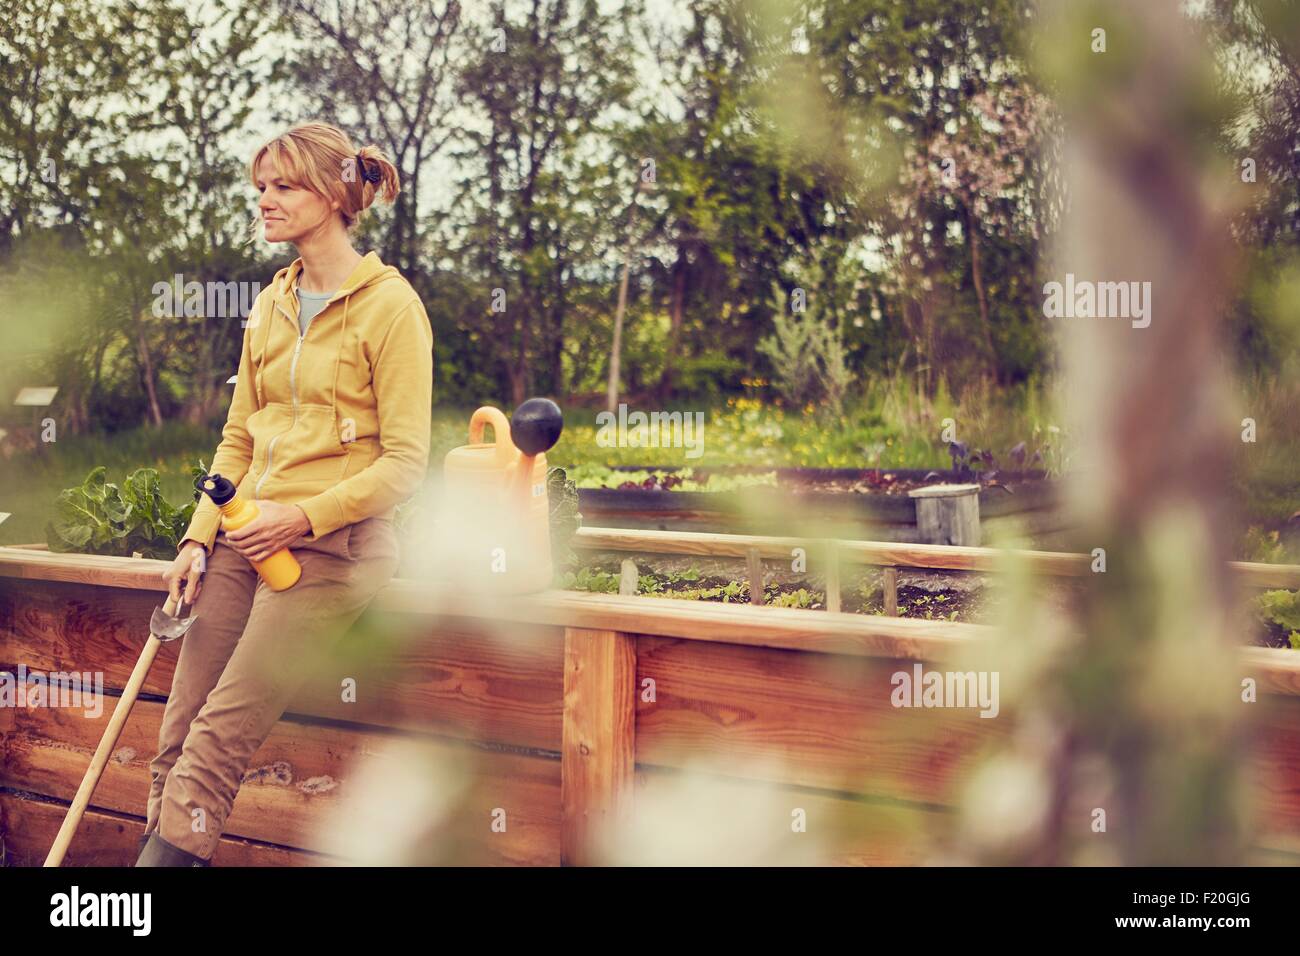 Mature woman, leaning against fence, taking a break from gardening, holding trowel and water bottle Stock Photo